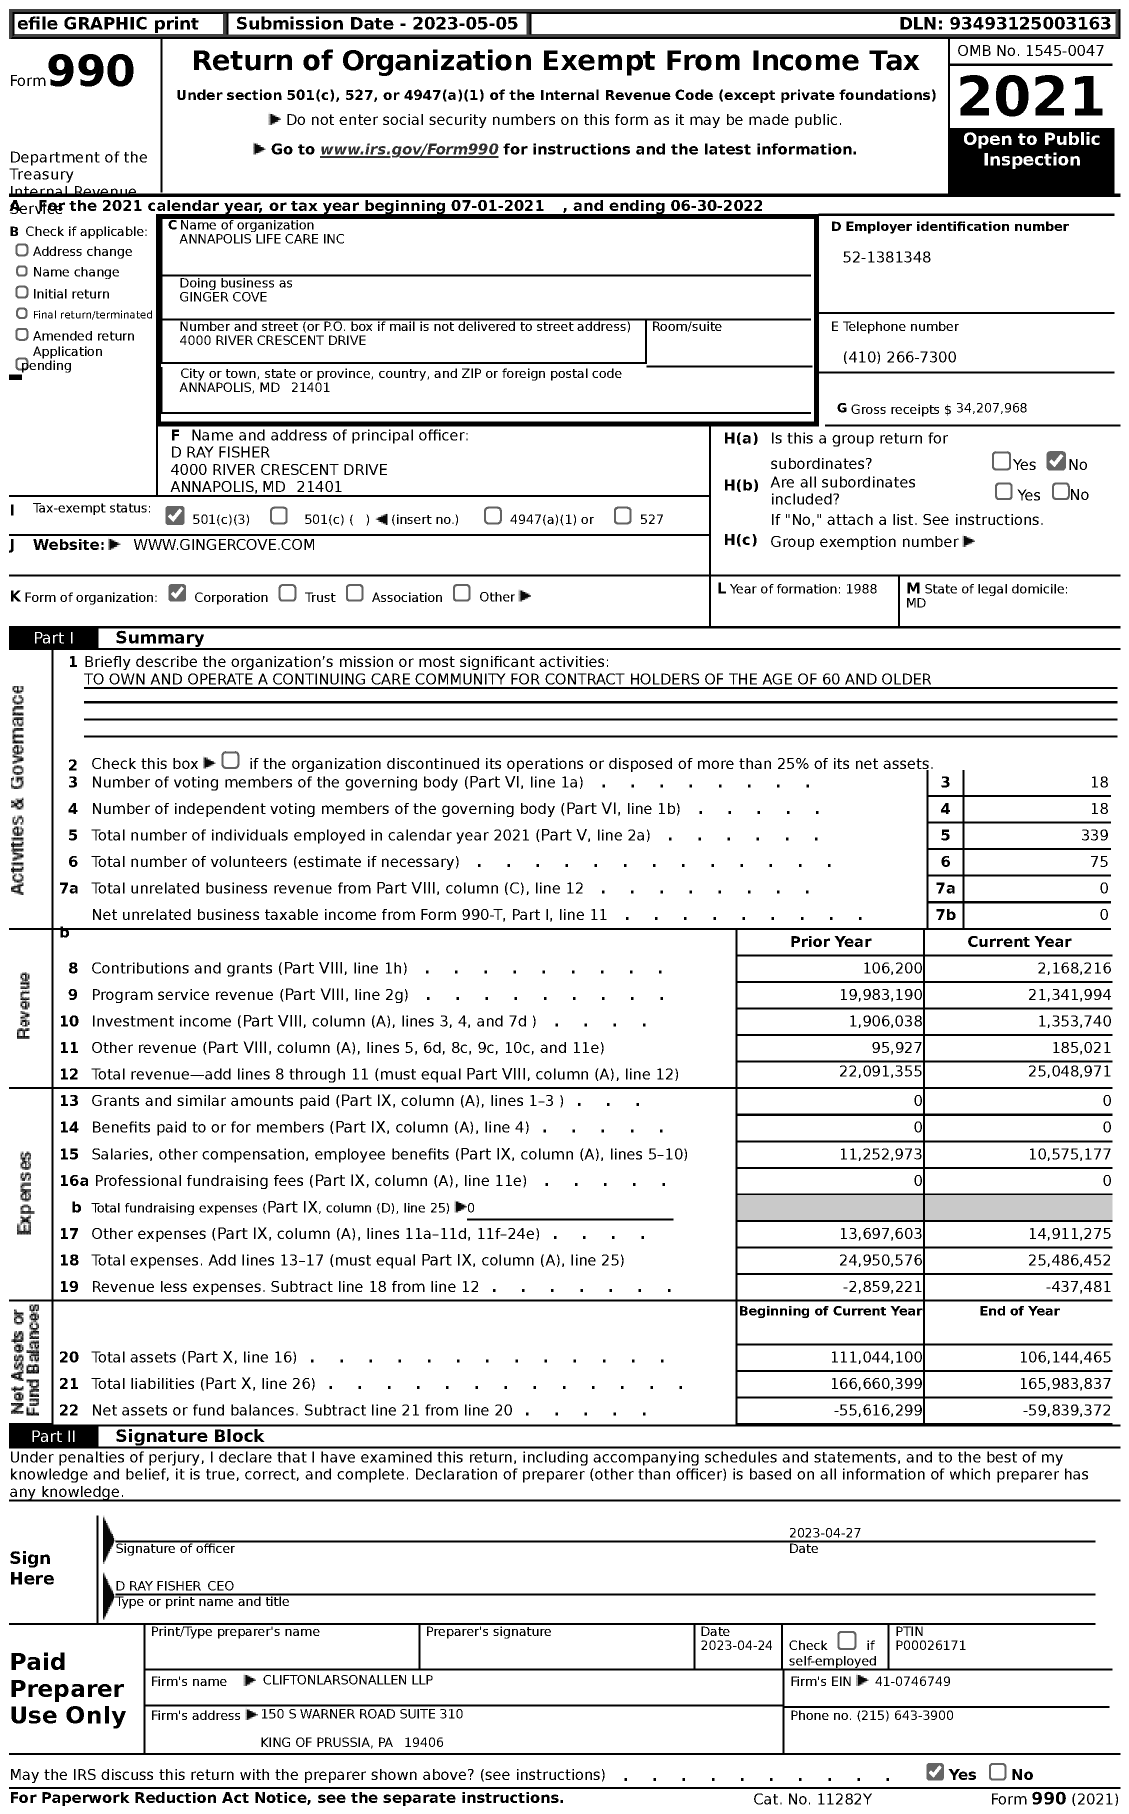 Image of first page of 2021 Form 990 for Ginger Cove (GC)